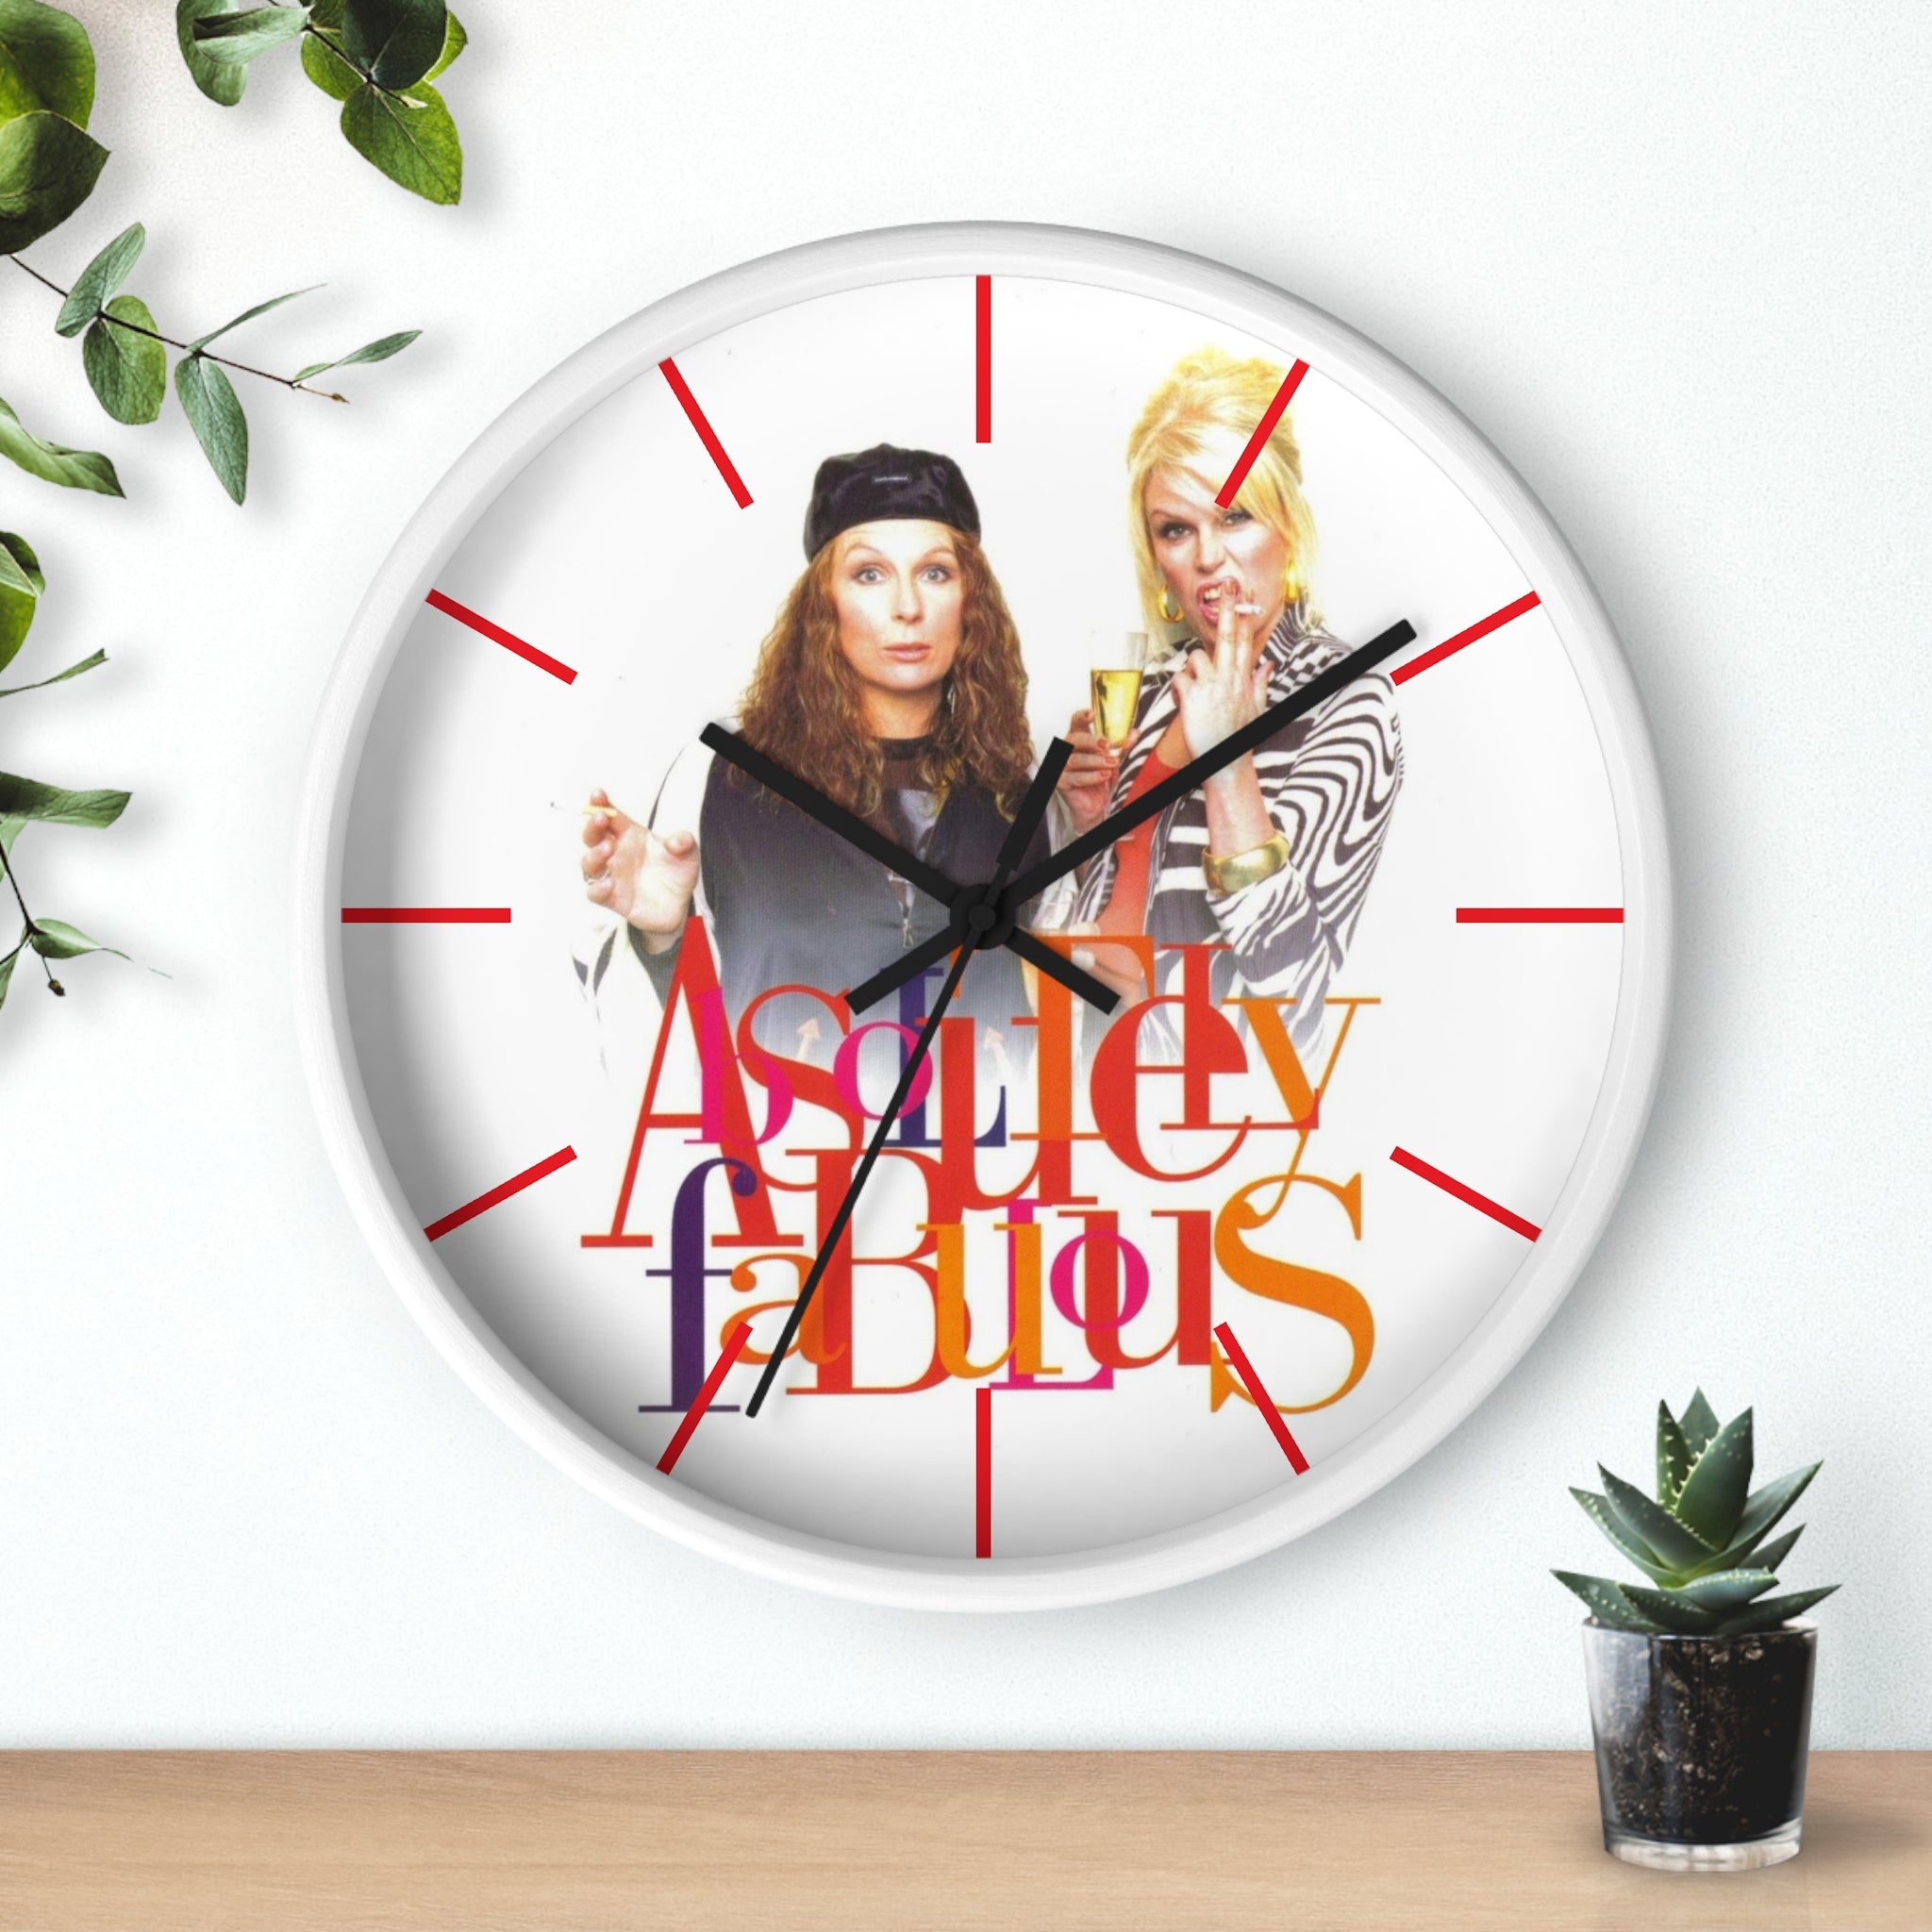 https://creationsbychrisandcarlos.store/products/absolutely-fabulous-wall-clock